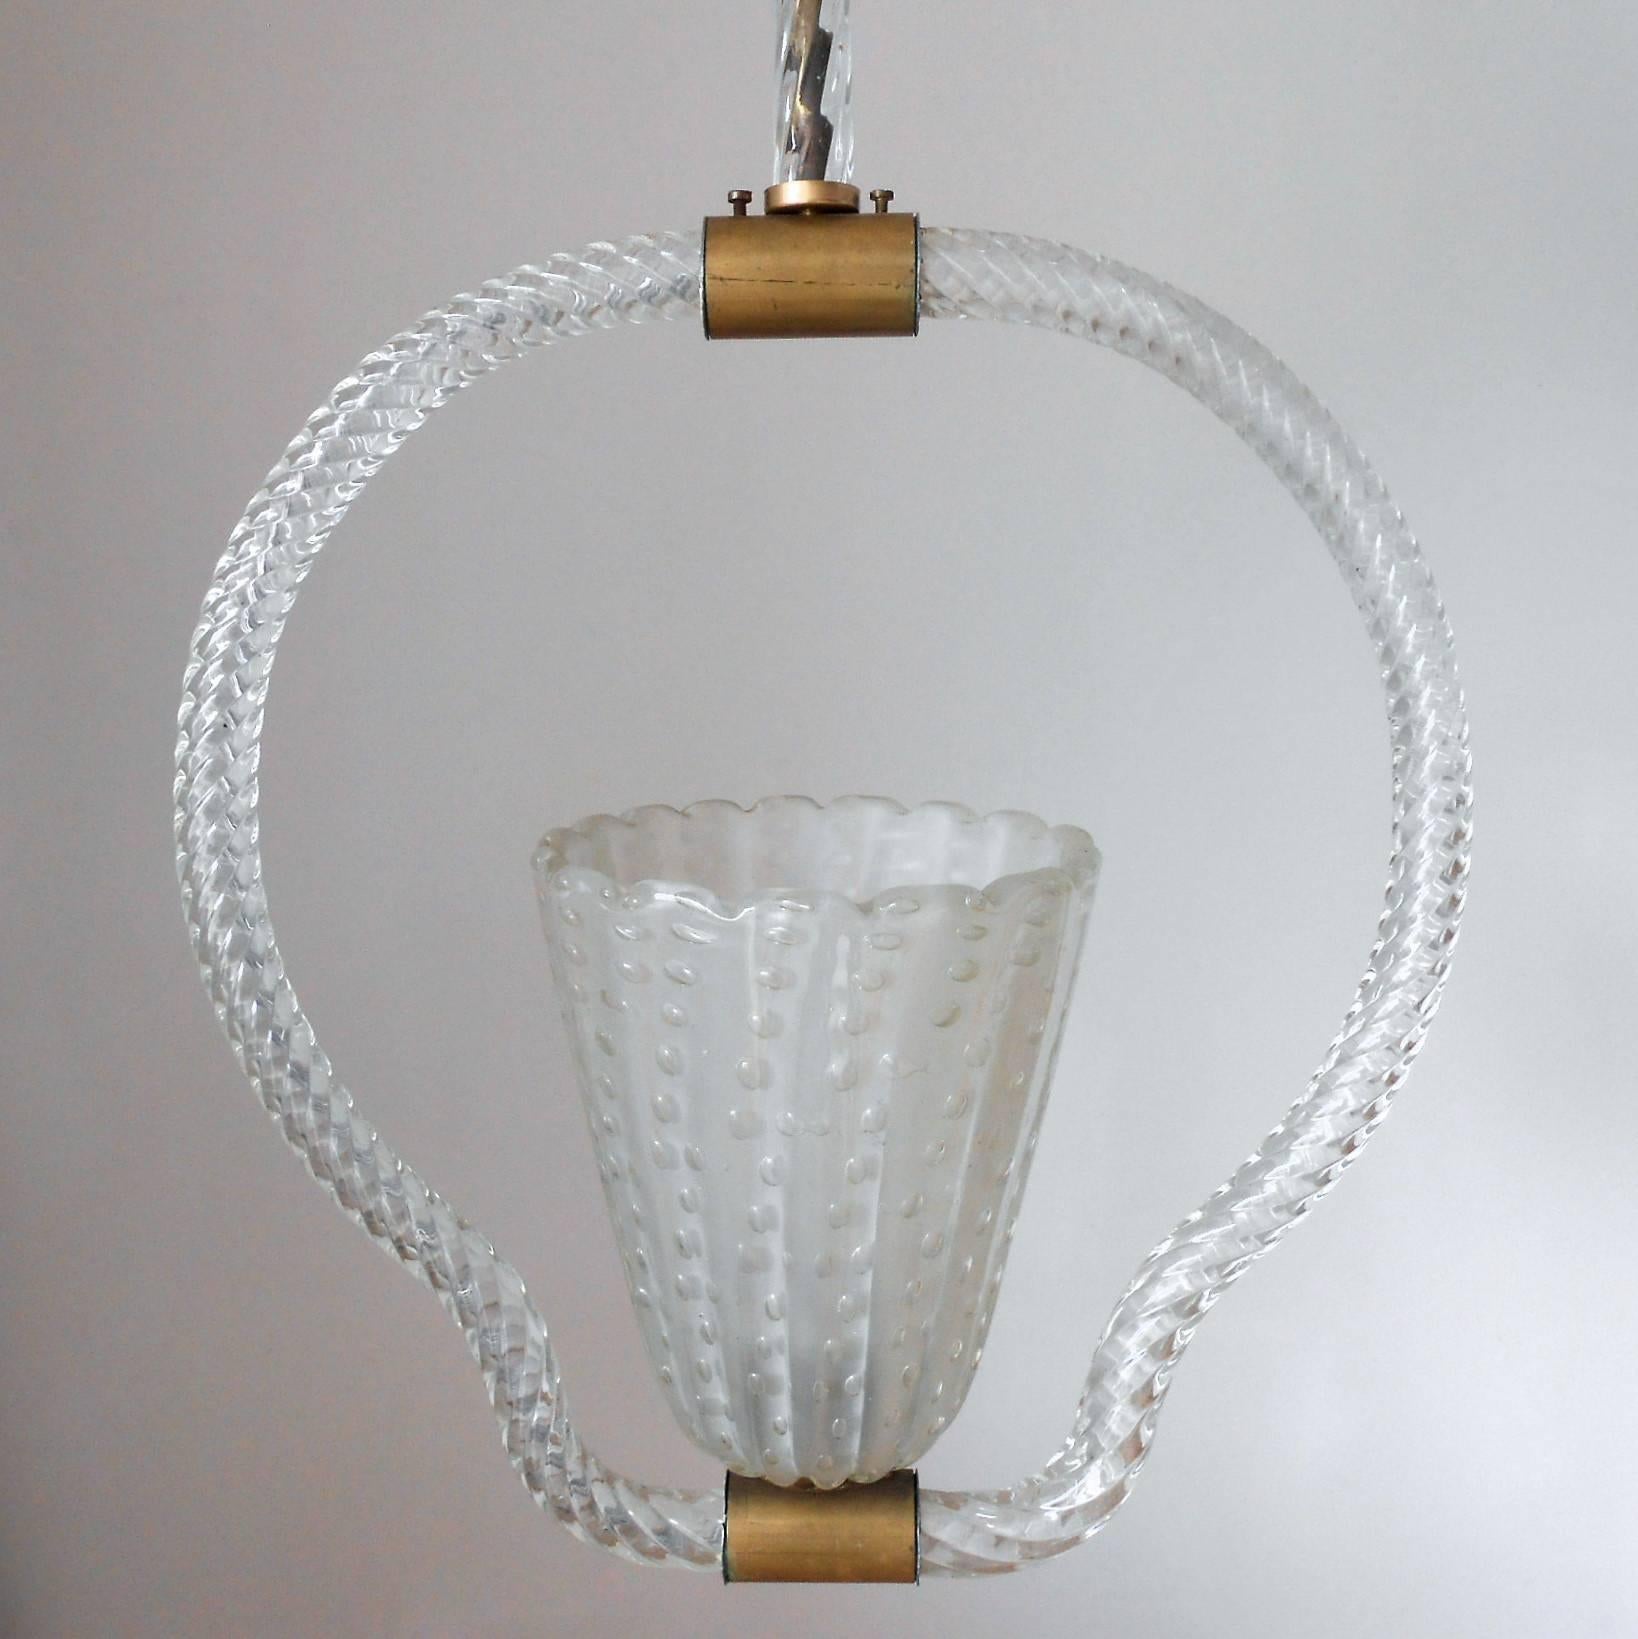 Vintage Italian pendant with clear Murano glass hand blown with bubbles within the glass using Pulegoso technique and brass details / Designed by Ercole Barovier circa 1950’s / Made in Italy
1 light / E26 or E27 type / max 60W
Height: 34 inches /